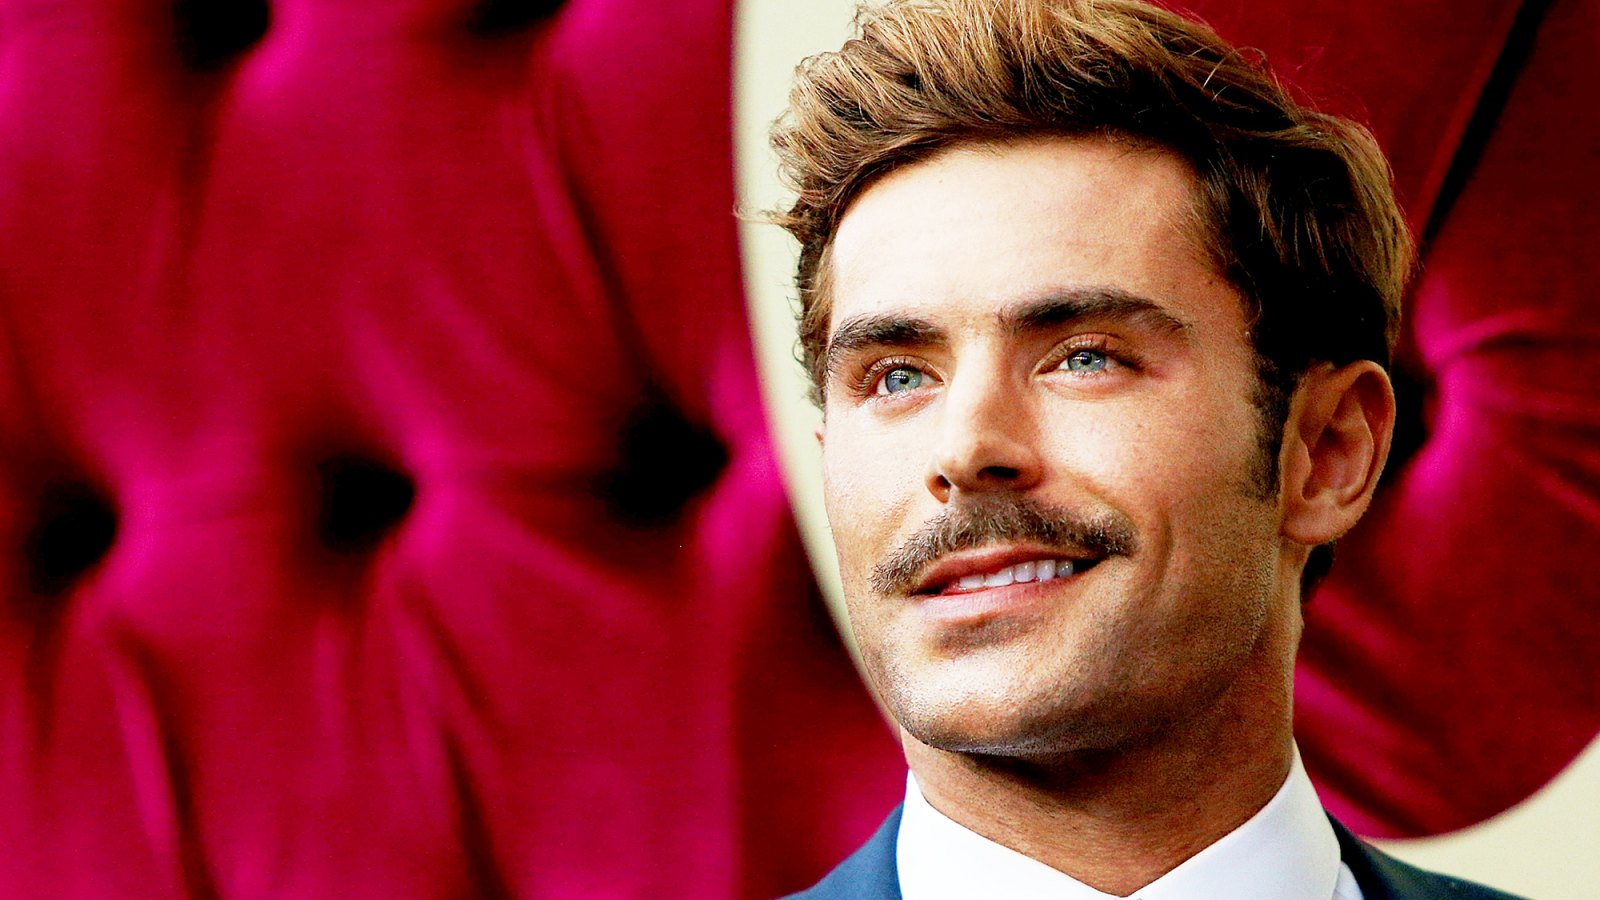 Zac Efron attends the Australian 2017 premiere of The Greatest Showman at The Star in Sydney, Australia.